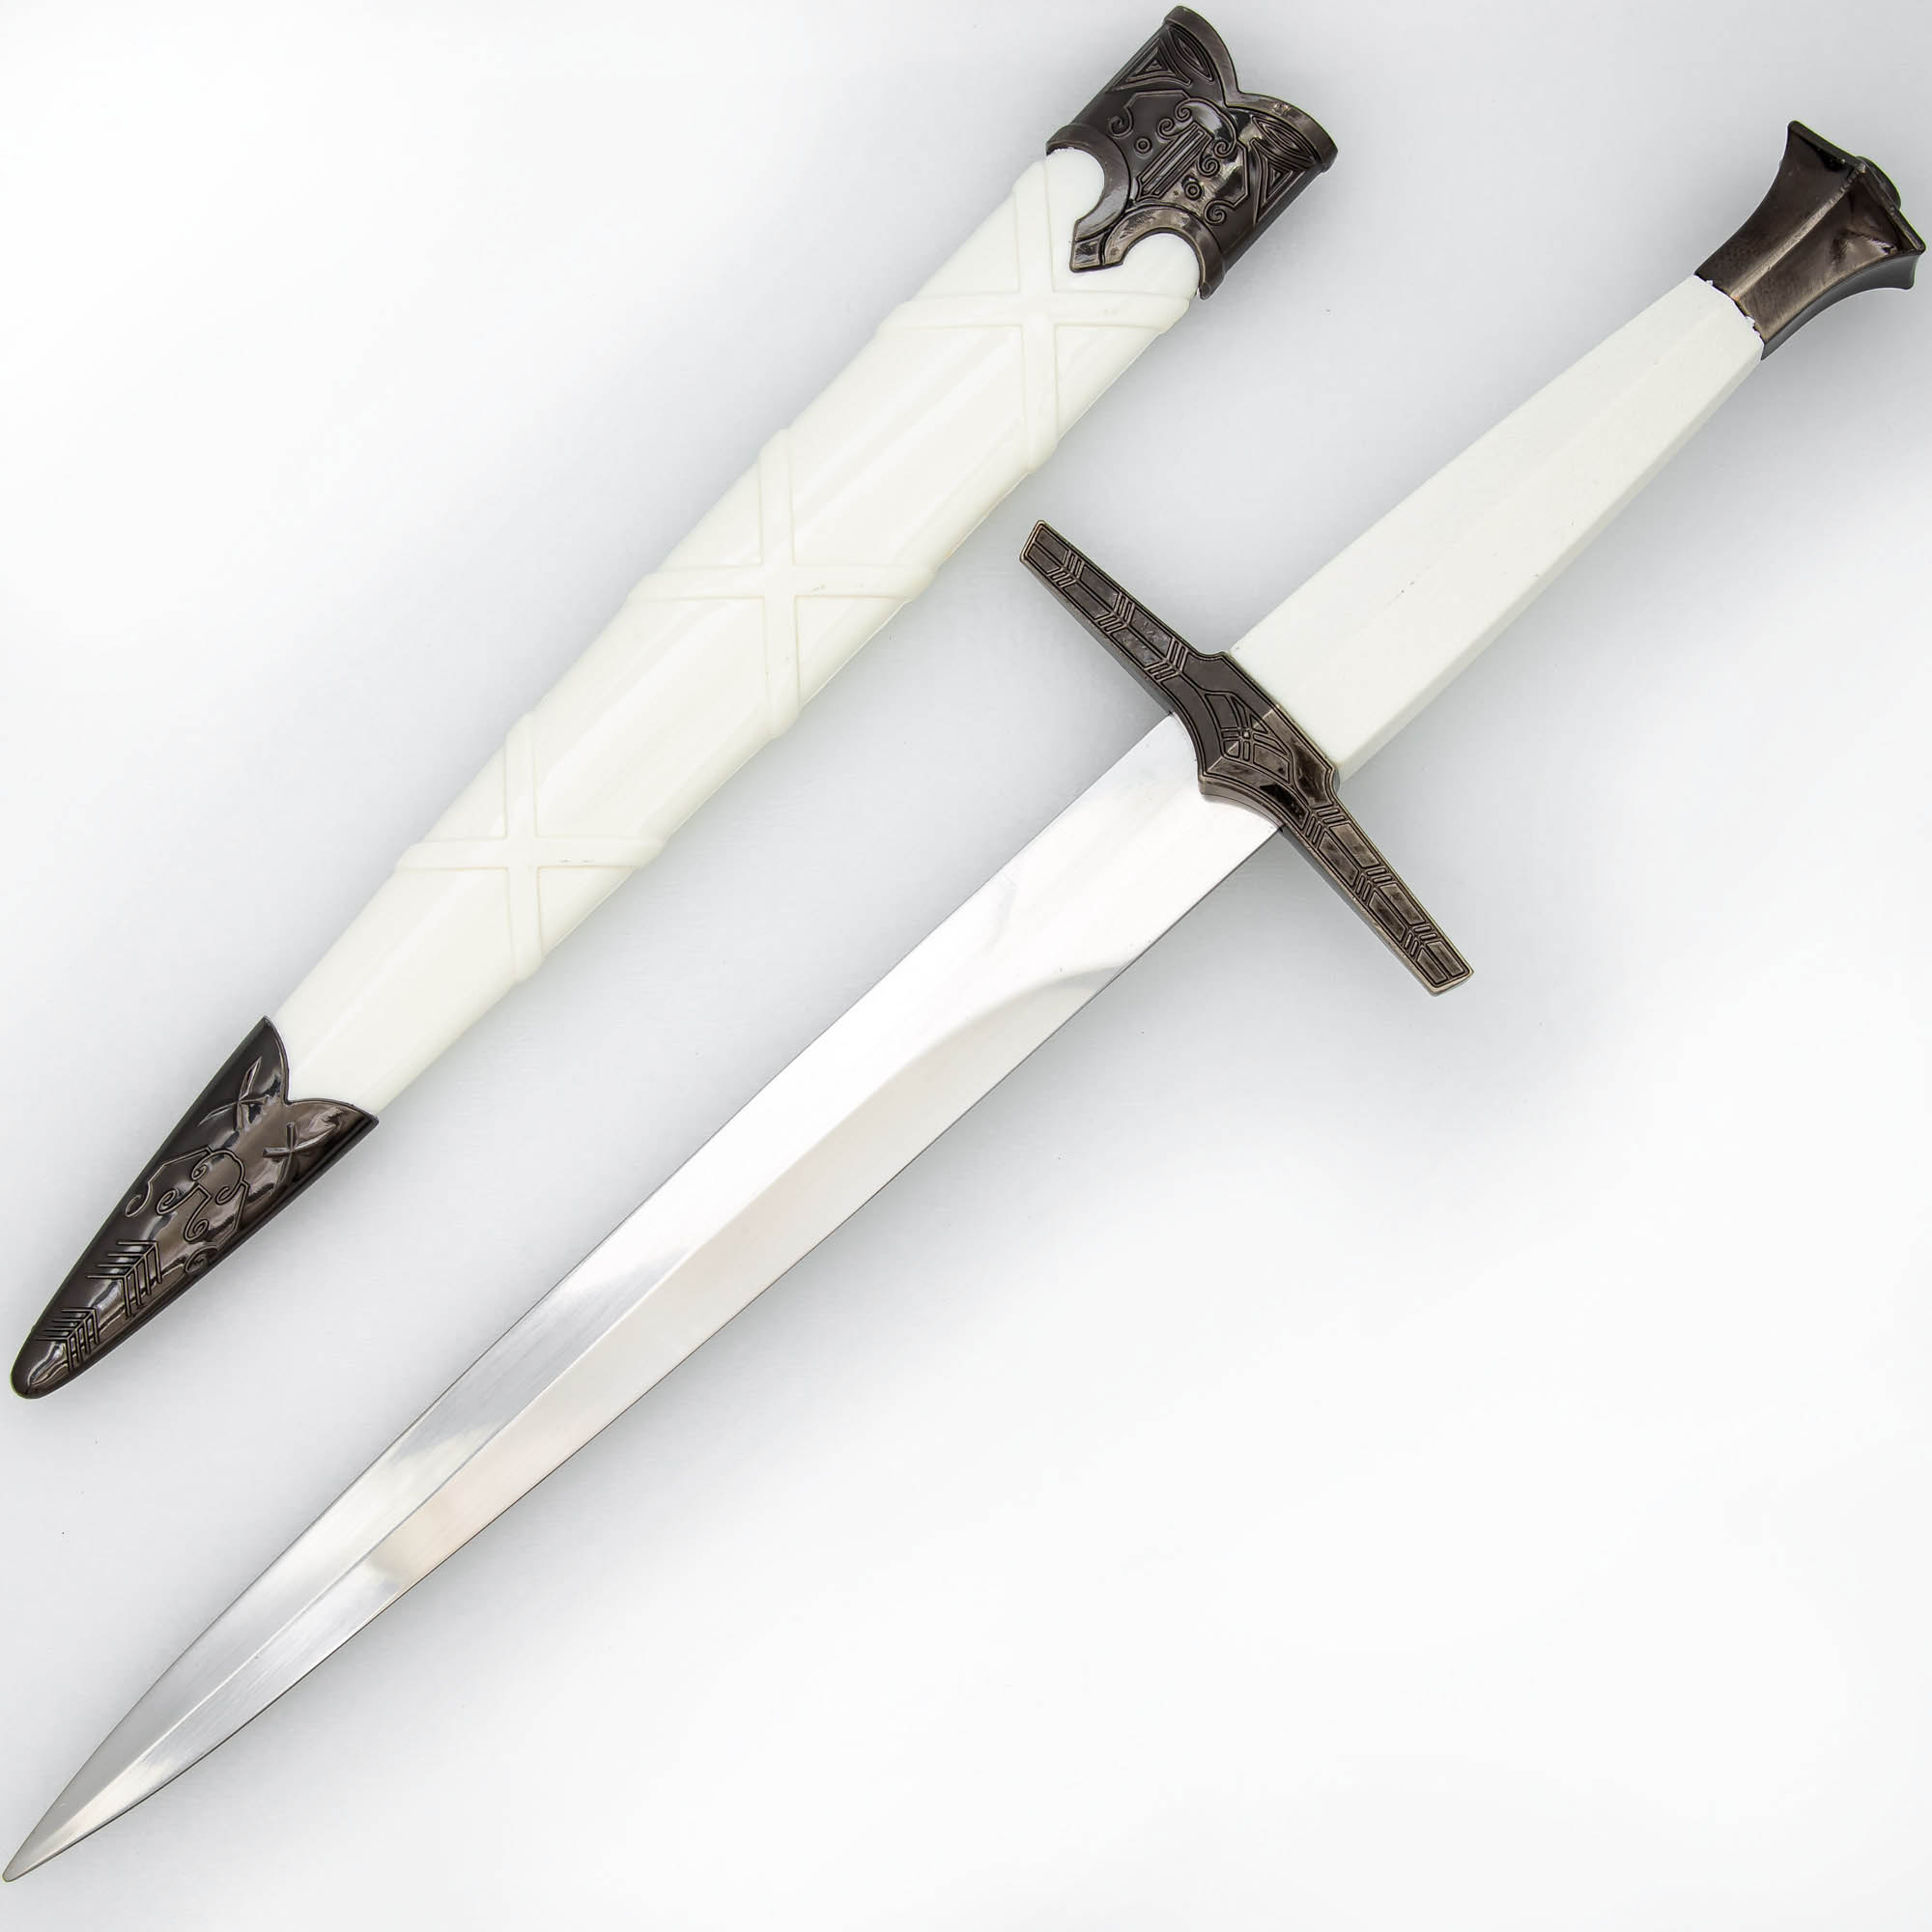 Icecap Impact Medieval Dagger w/ Hard Scabbard Historical Reenactment Knightly Cosplay COSTUME Knife